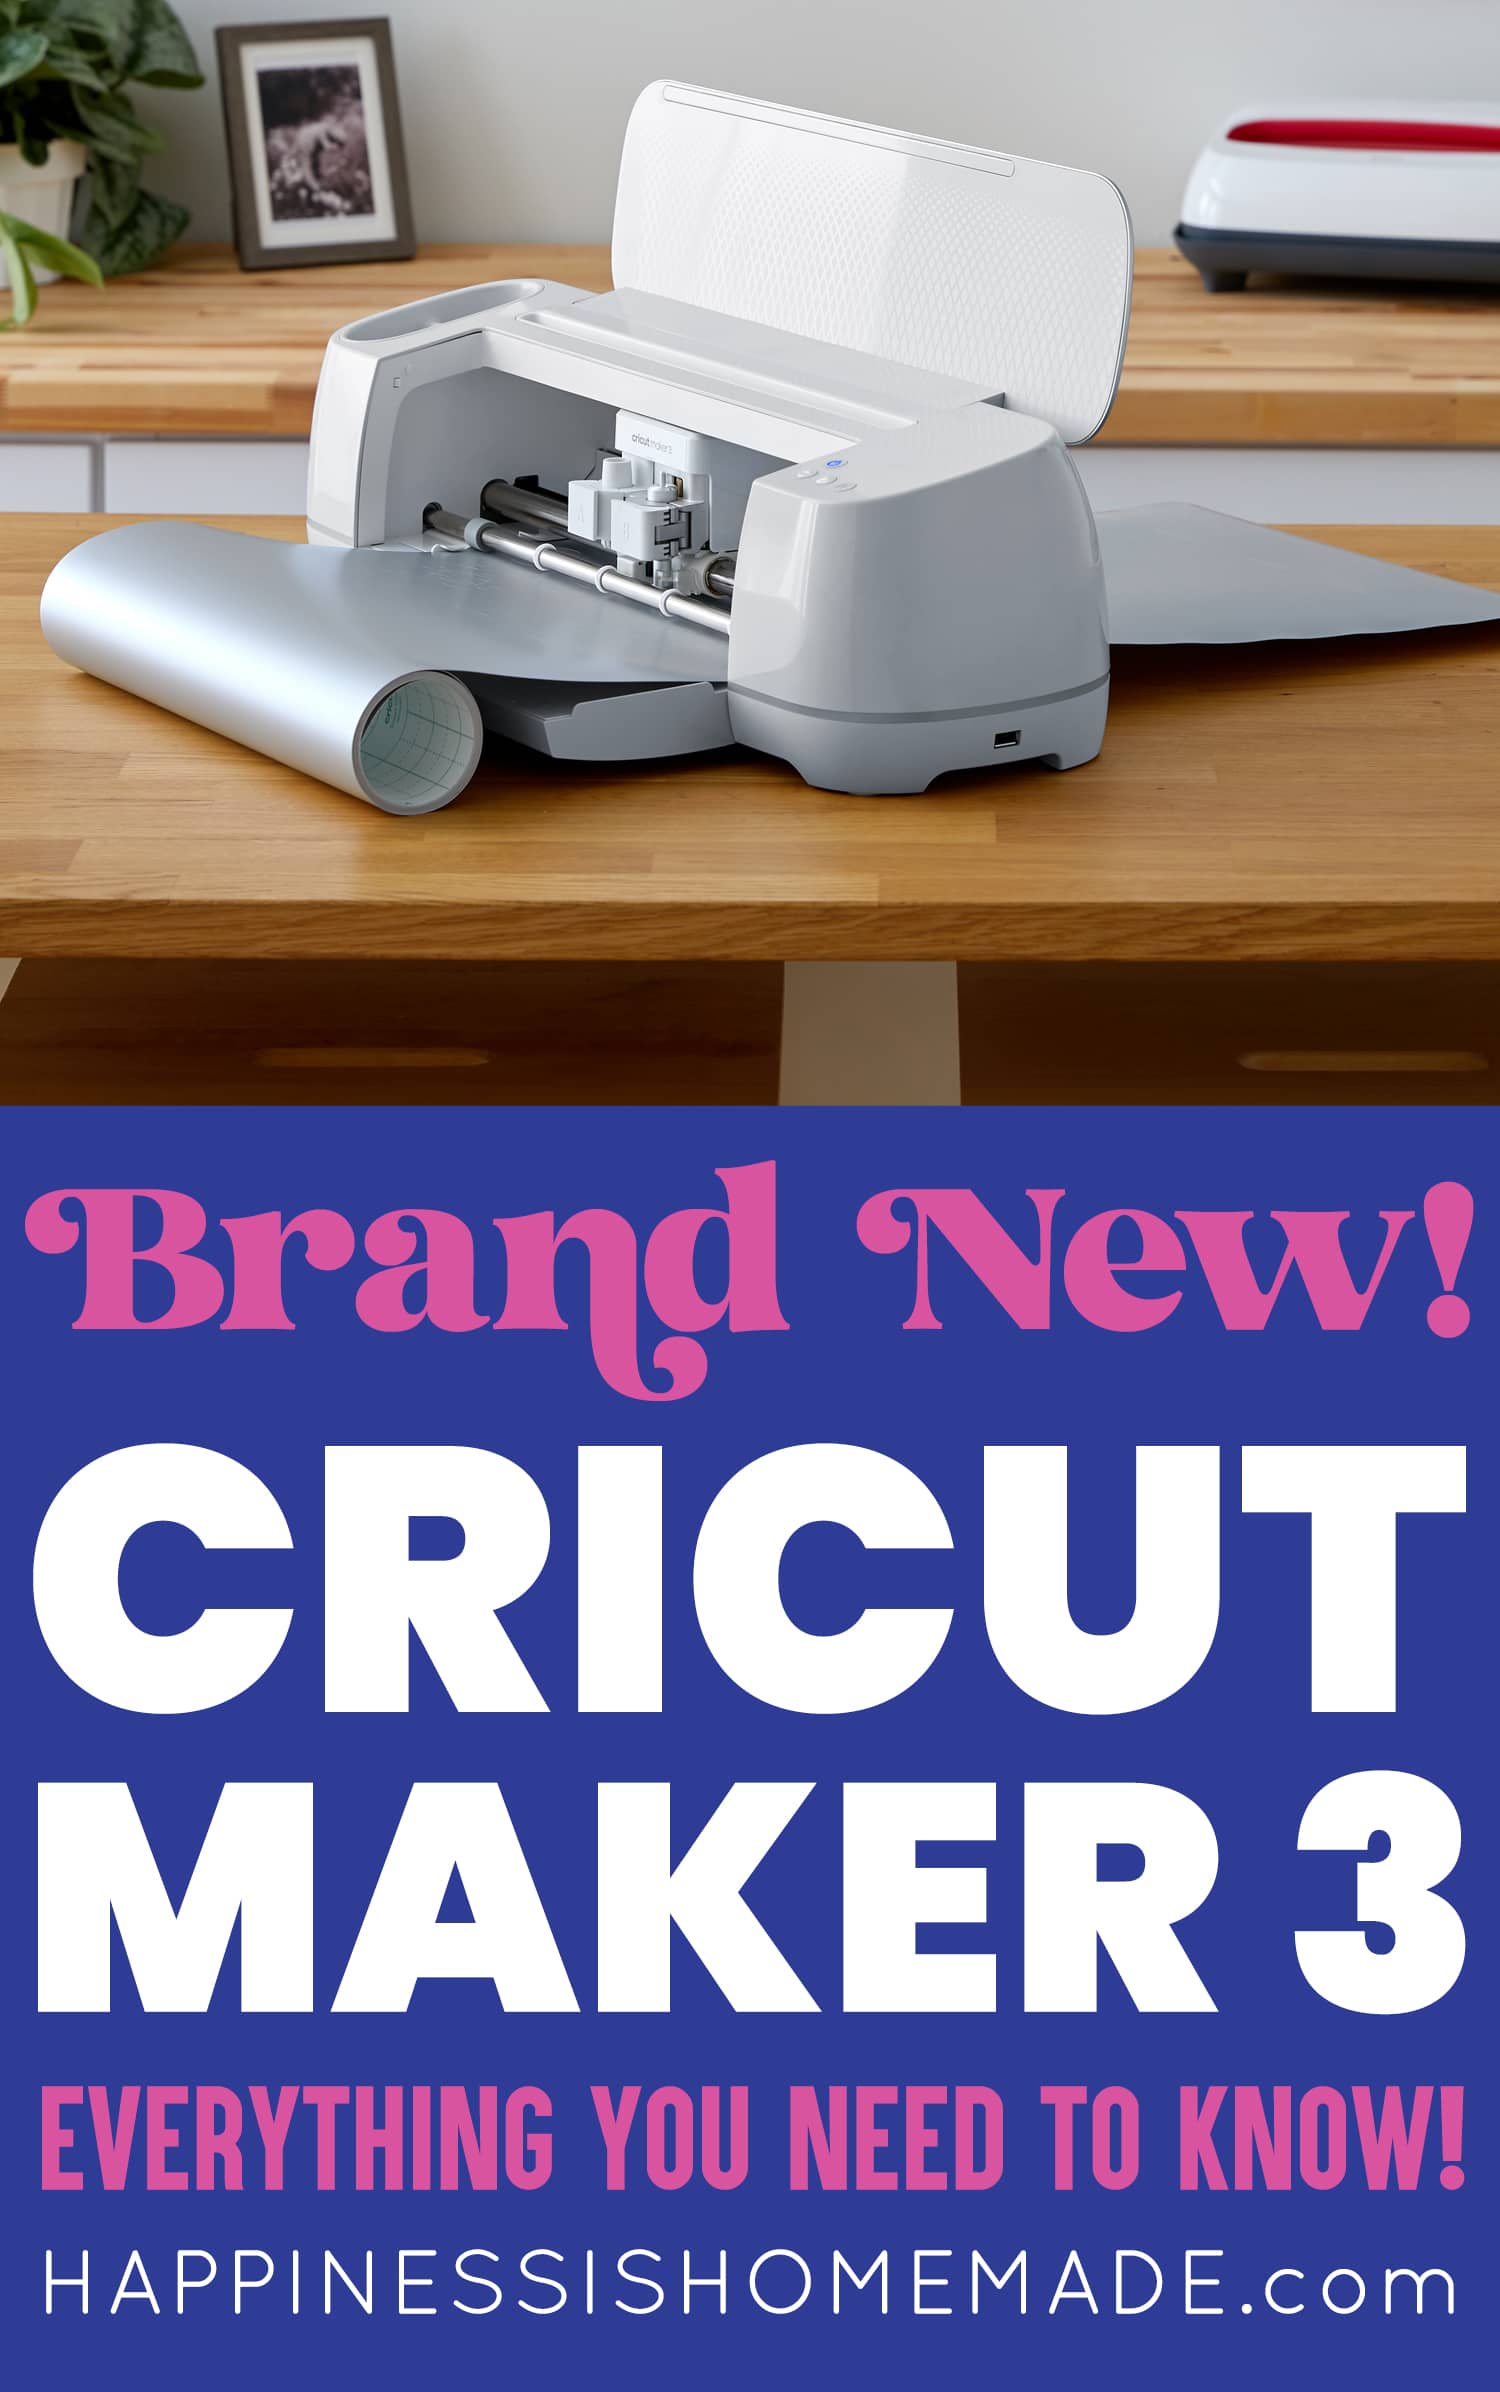 Projects You Can Make With The New Cricut Explore 3 and Cricut Maker 3 -  Creative Fabrica